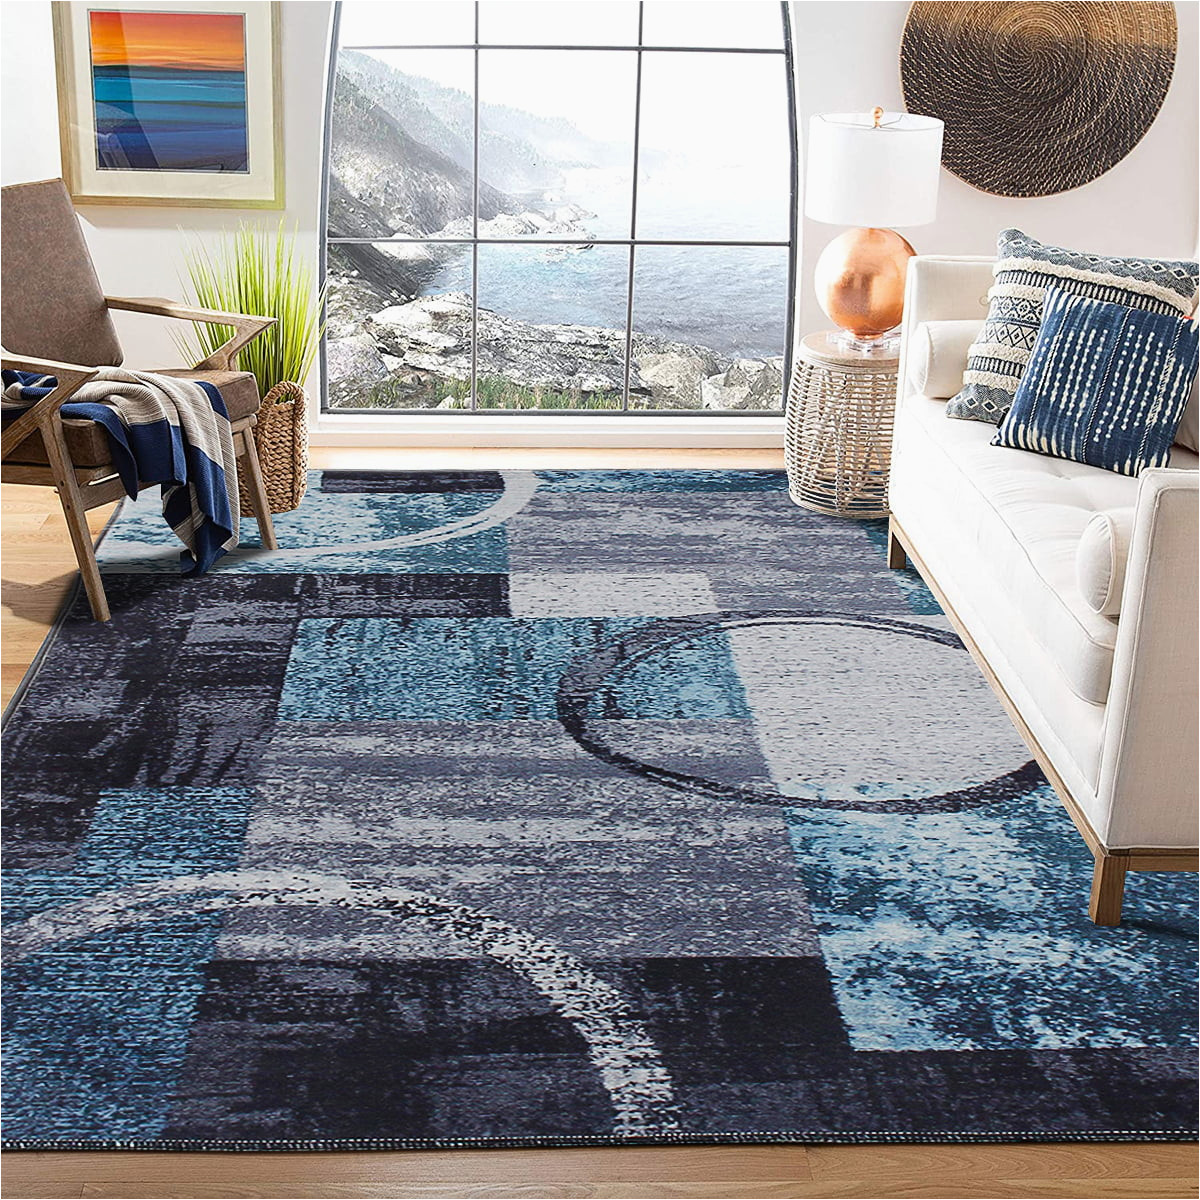 Movie theater themed area Rugs Large Modern area Rugs for Living Room In Home, Floor Carpet Mat …